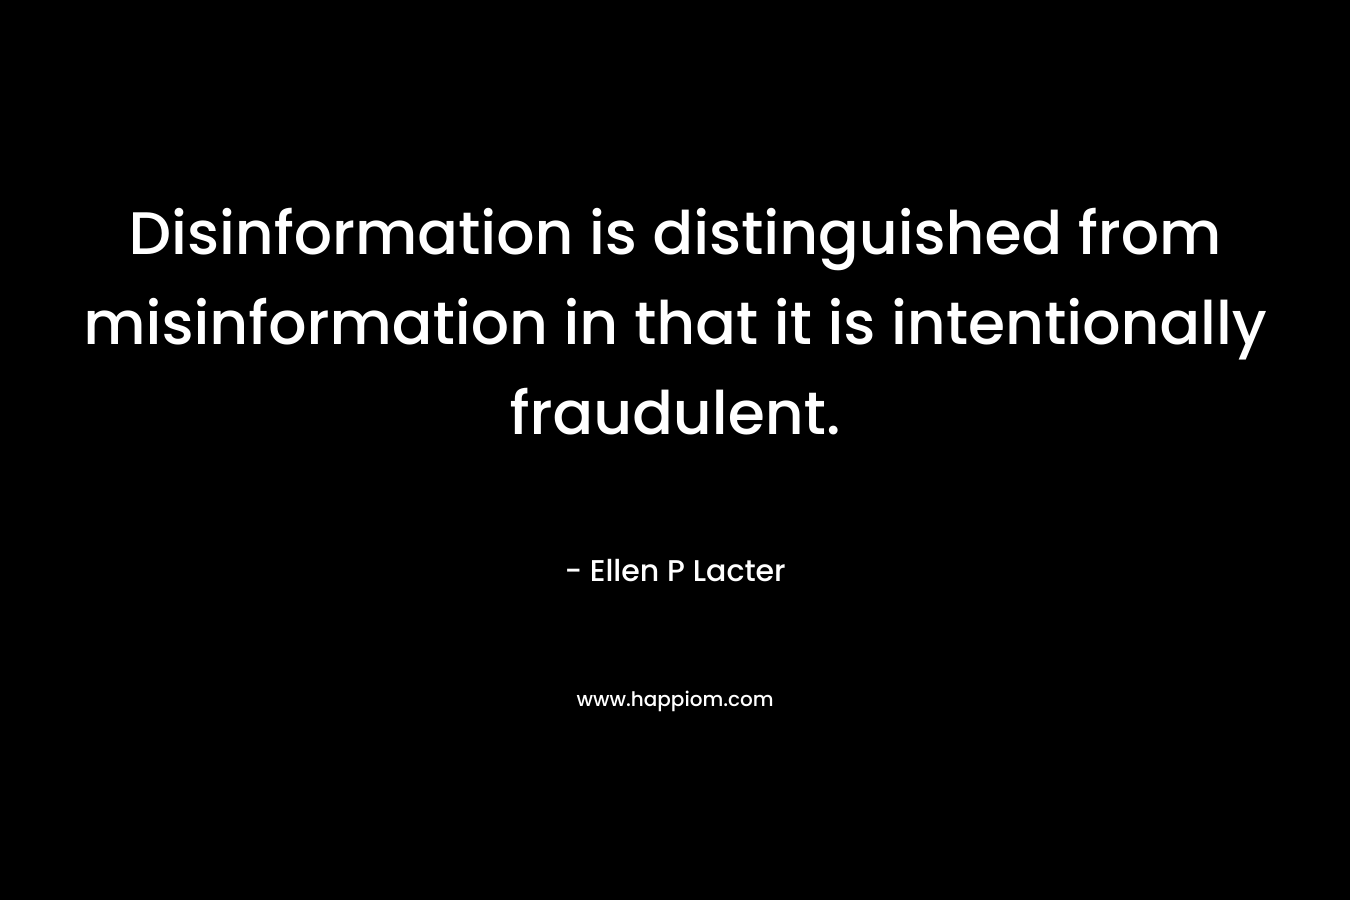 Disinformation is distinguished from misinformation in that it is intentionally fraudulent.